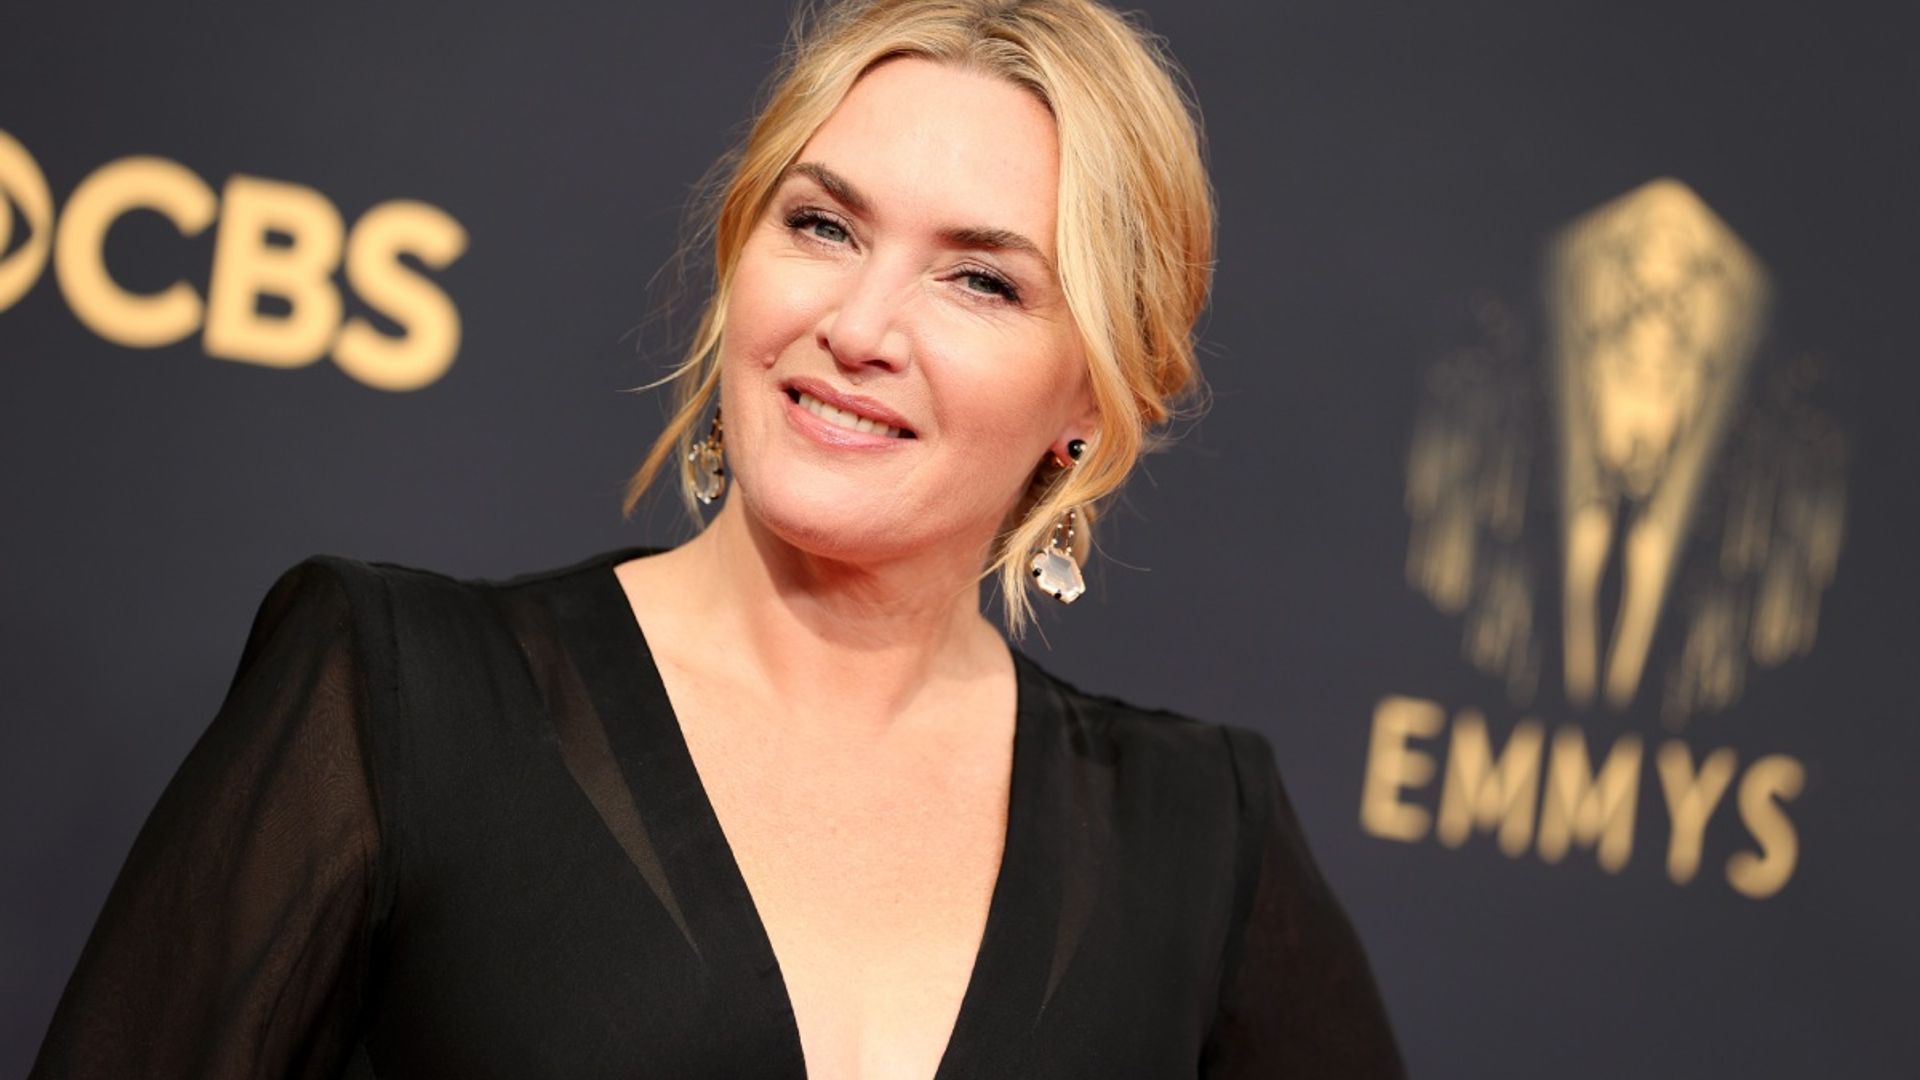 Kate Winslet reveals 'heartbreak' during unexpected appearance at the SAG Awards